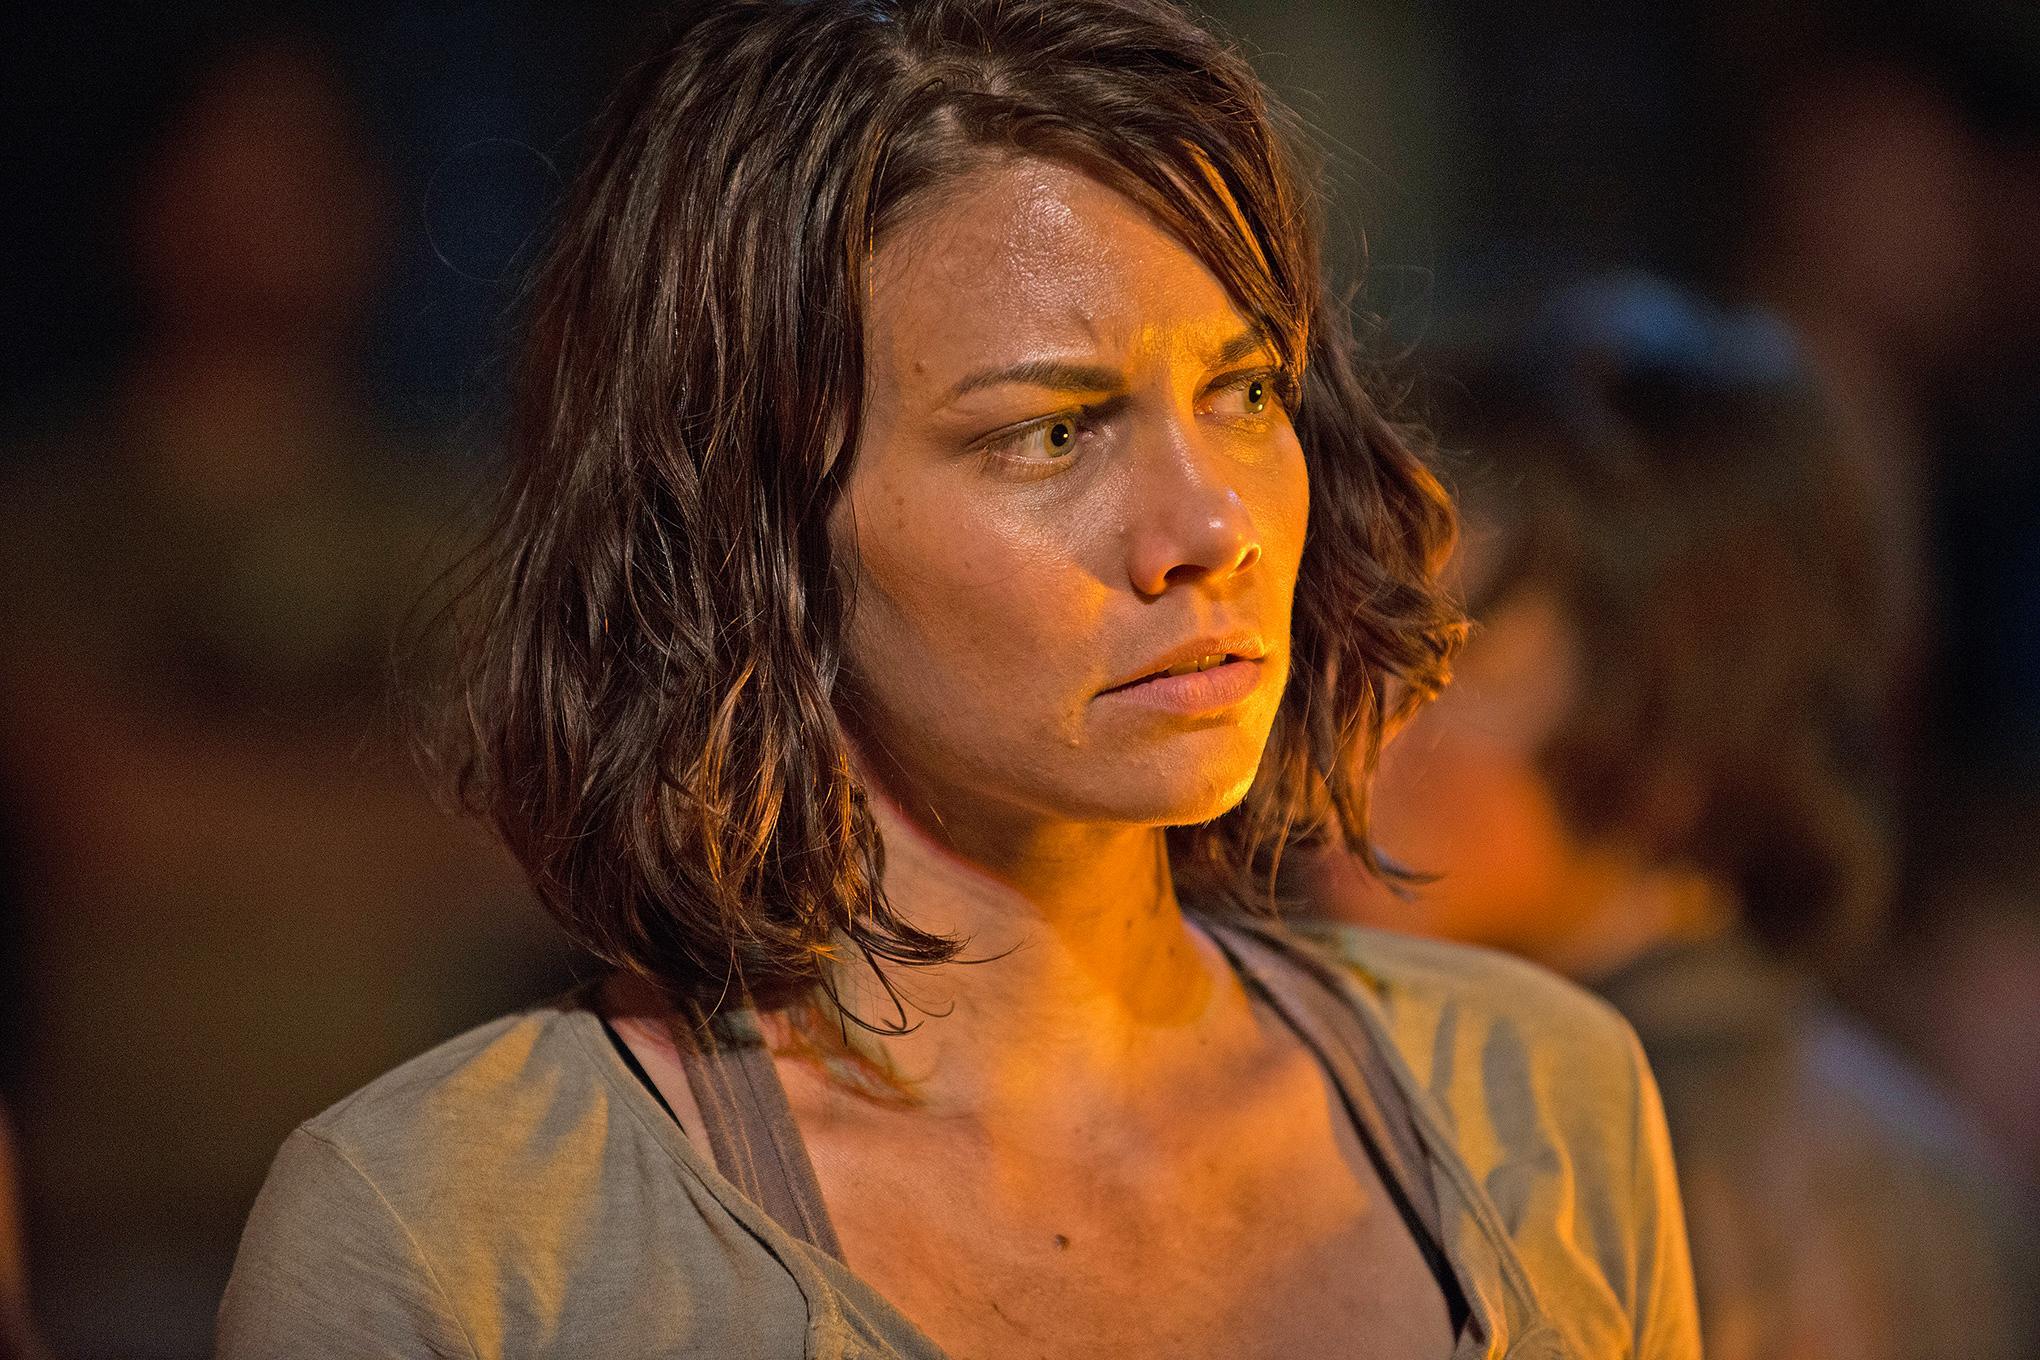 The Walking Deads Lauren Cohan Id Rather Have The Validation Of 6567